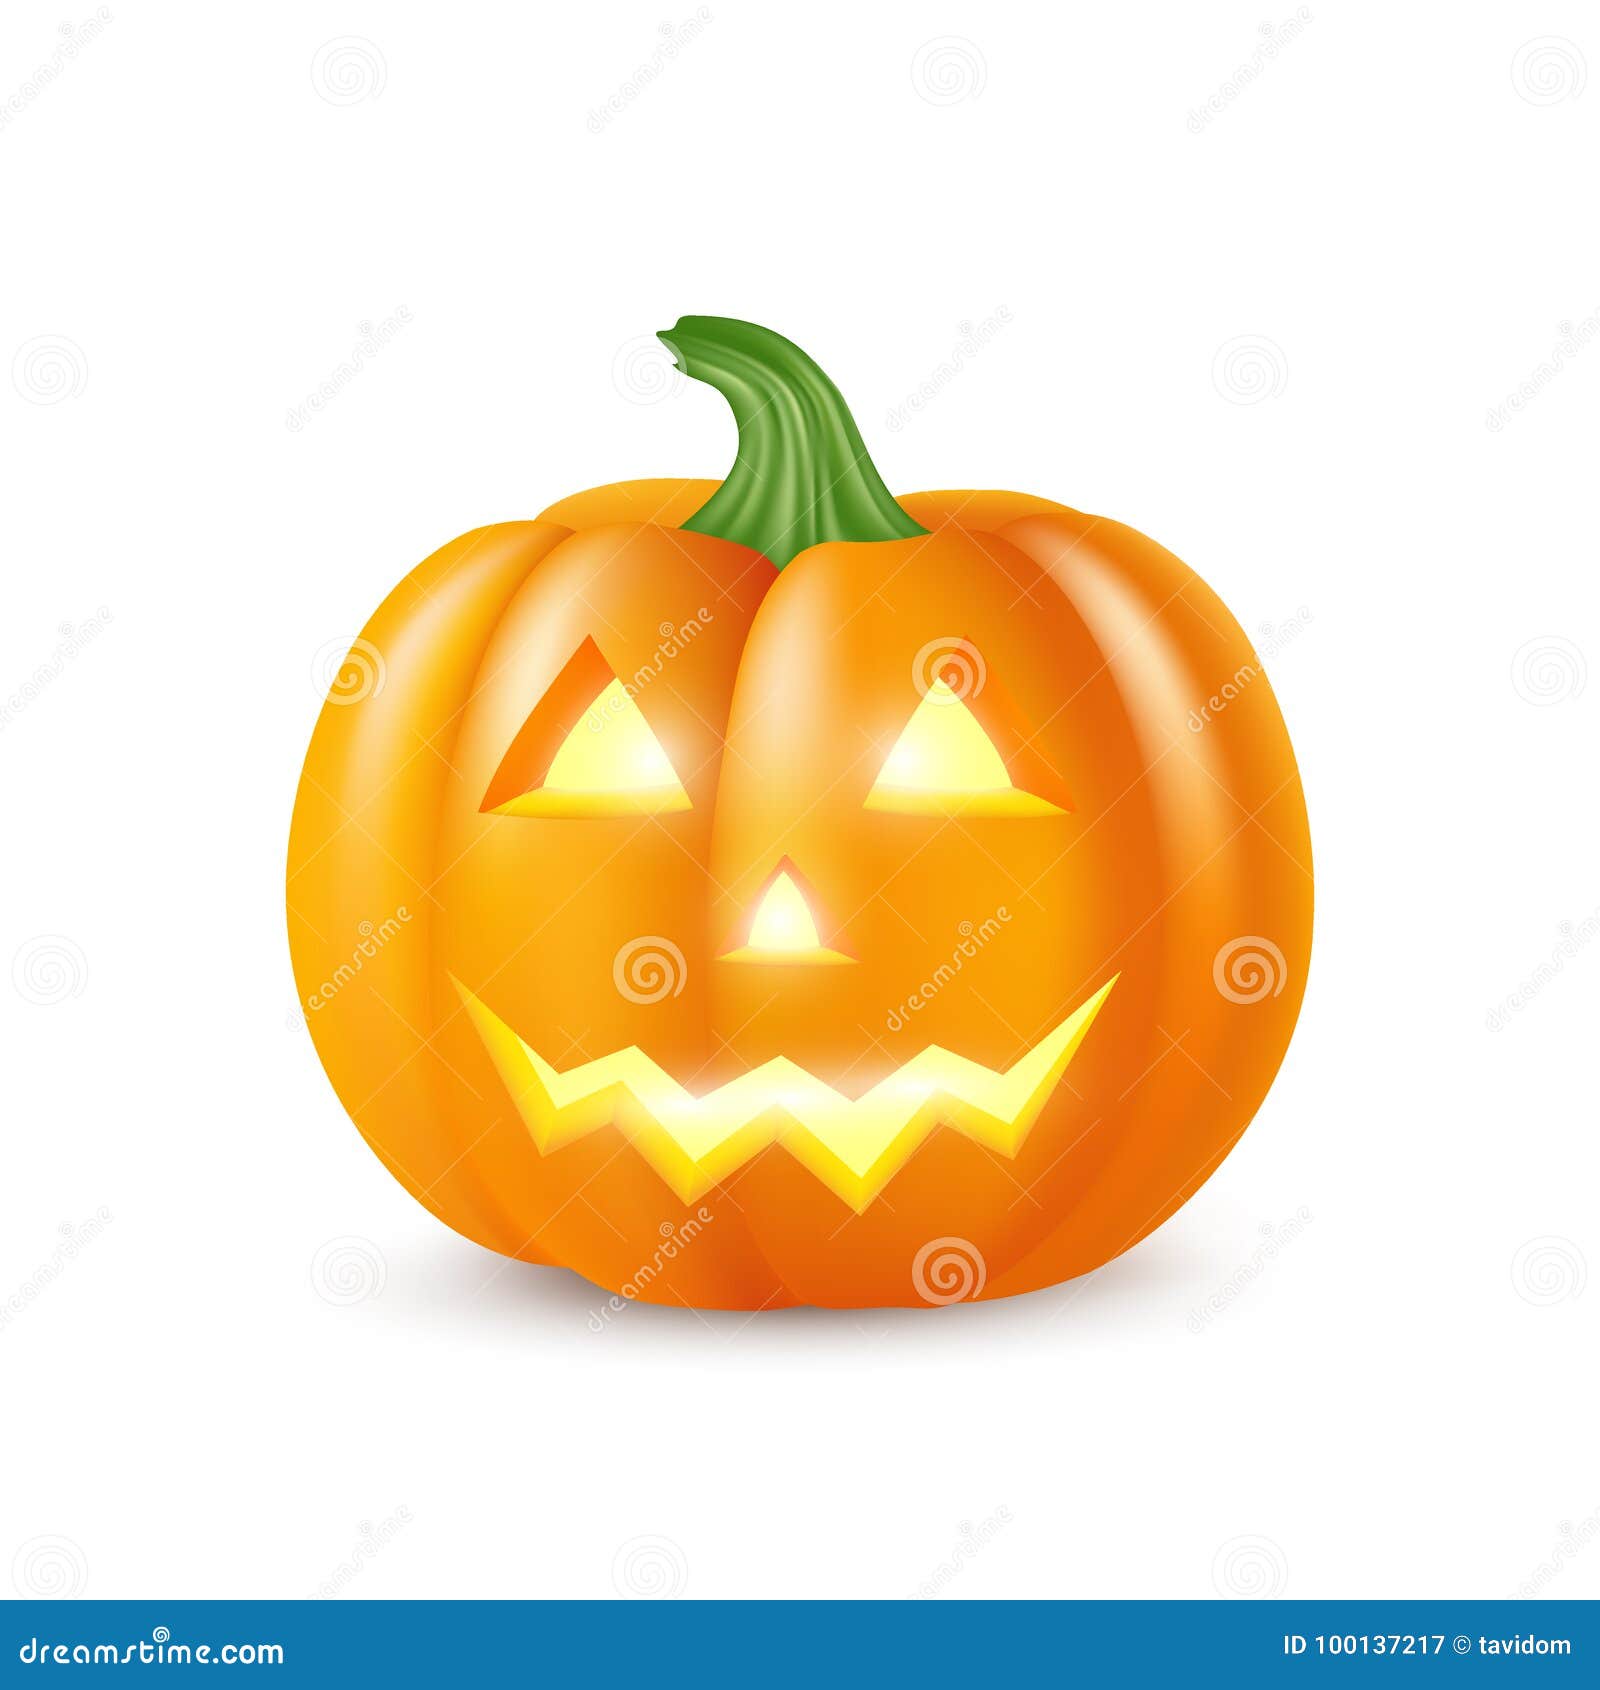 happy pumpkin face clipart yelling